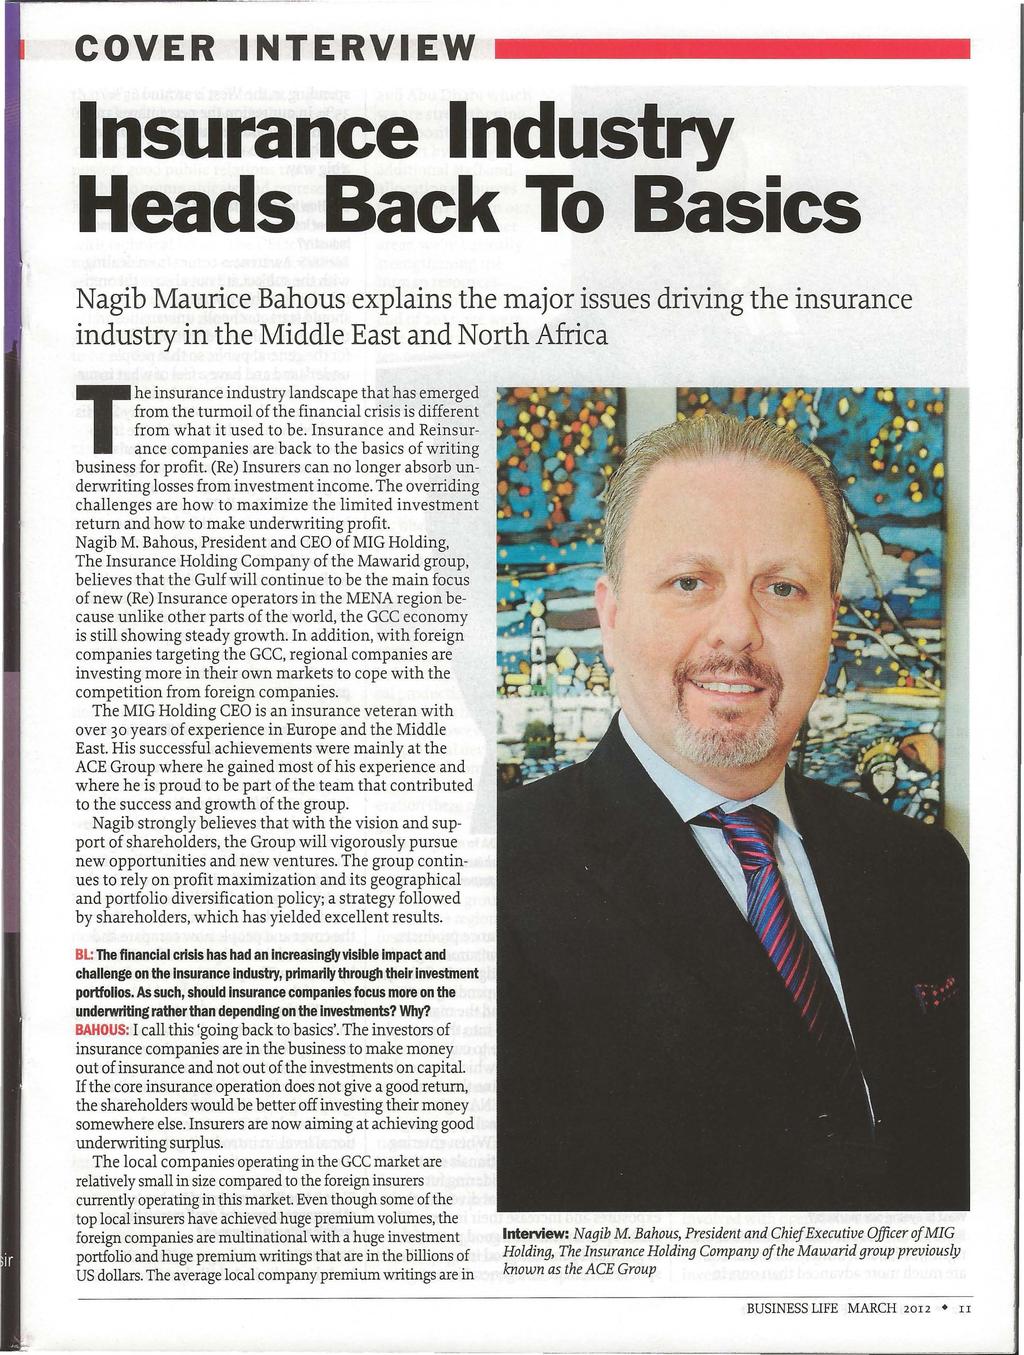 COVER INTERVIEW Heads Back To Basics Nagib Maurice Bahous explains the major issues driving the insurance industry in the Middle East and North Africa The insurance industry landscape that has